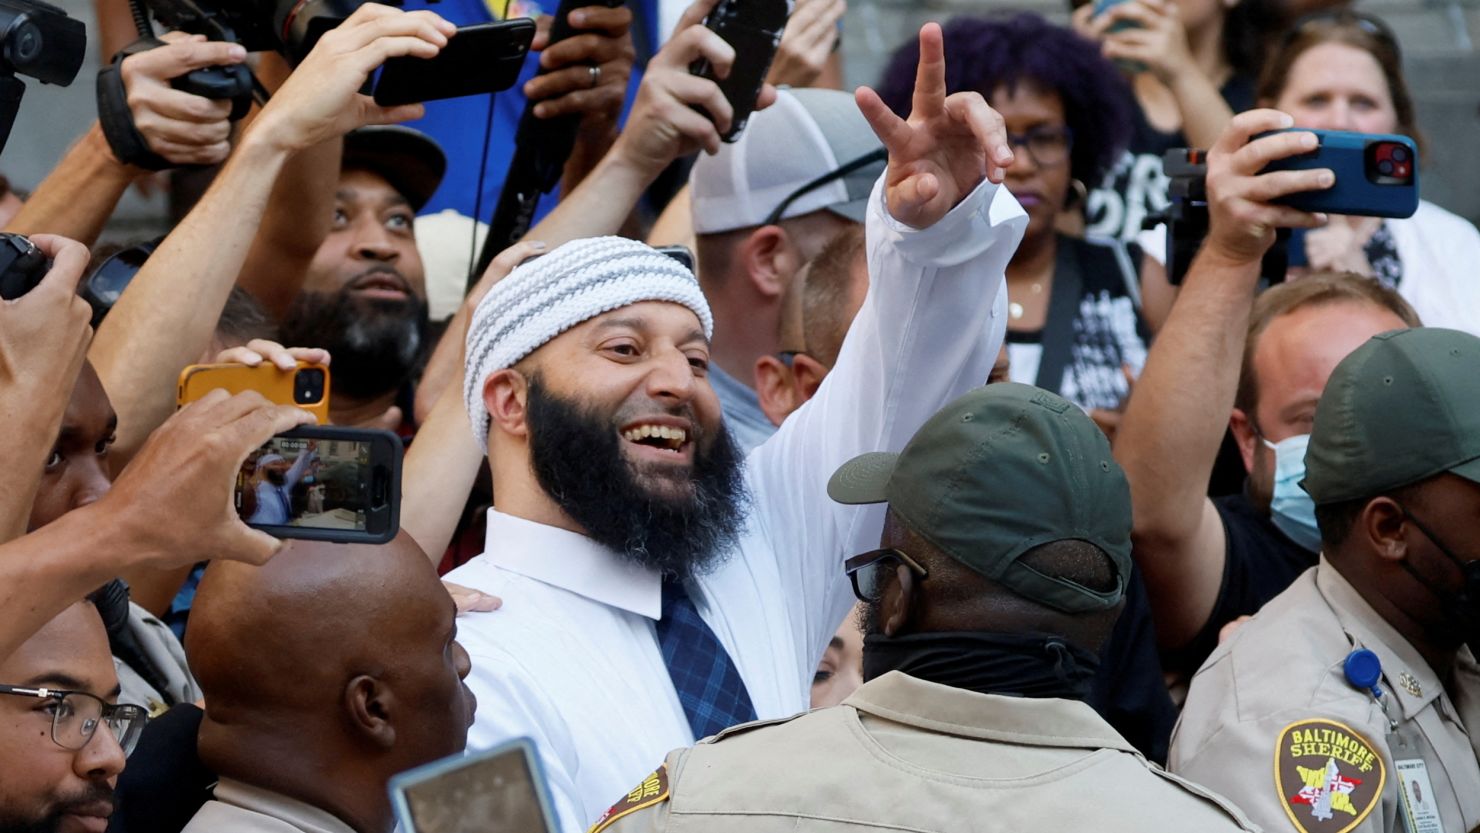 Adnan Syed, whose case was chronicled in the hit podcast "Serial," smiles and waves as he leaves the courthouse after a judge overturned Syed's 2000 murder conviction.